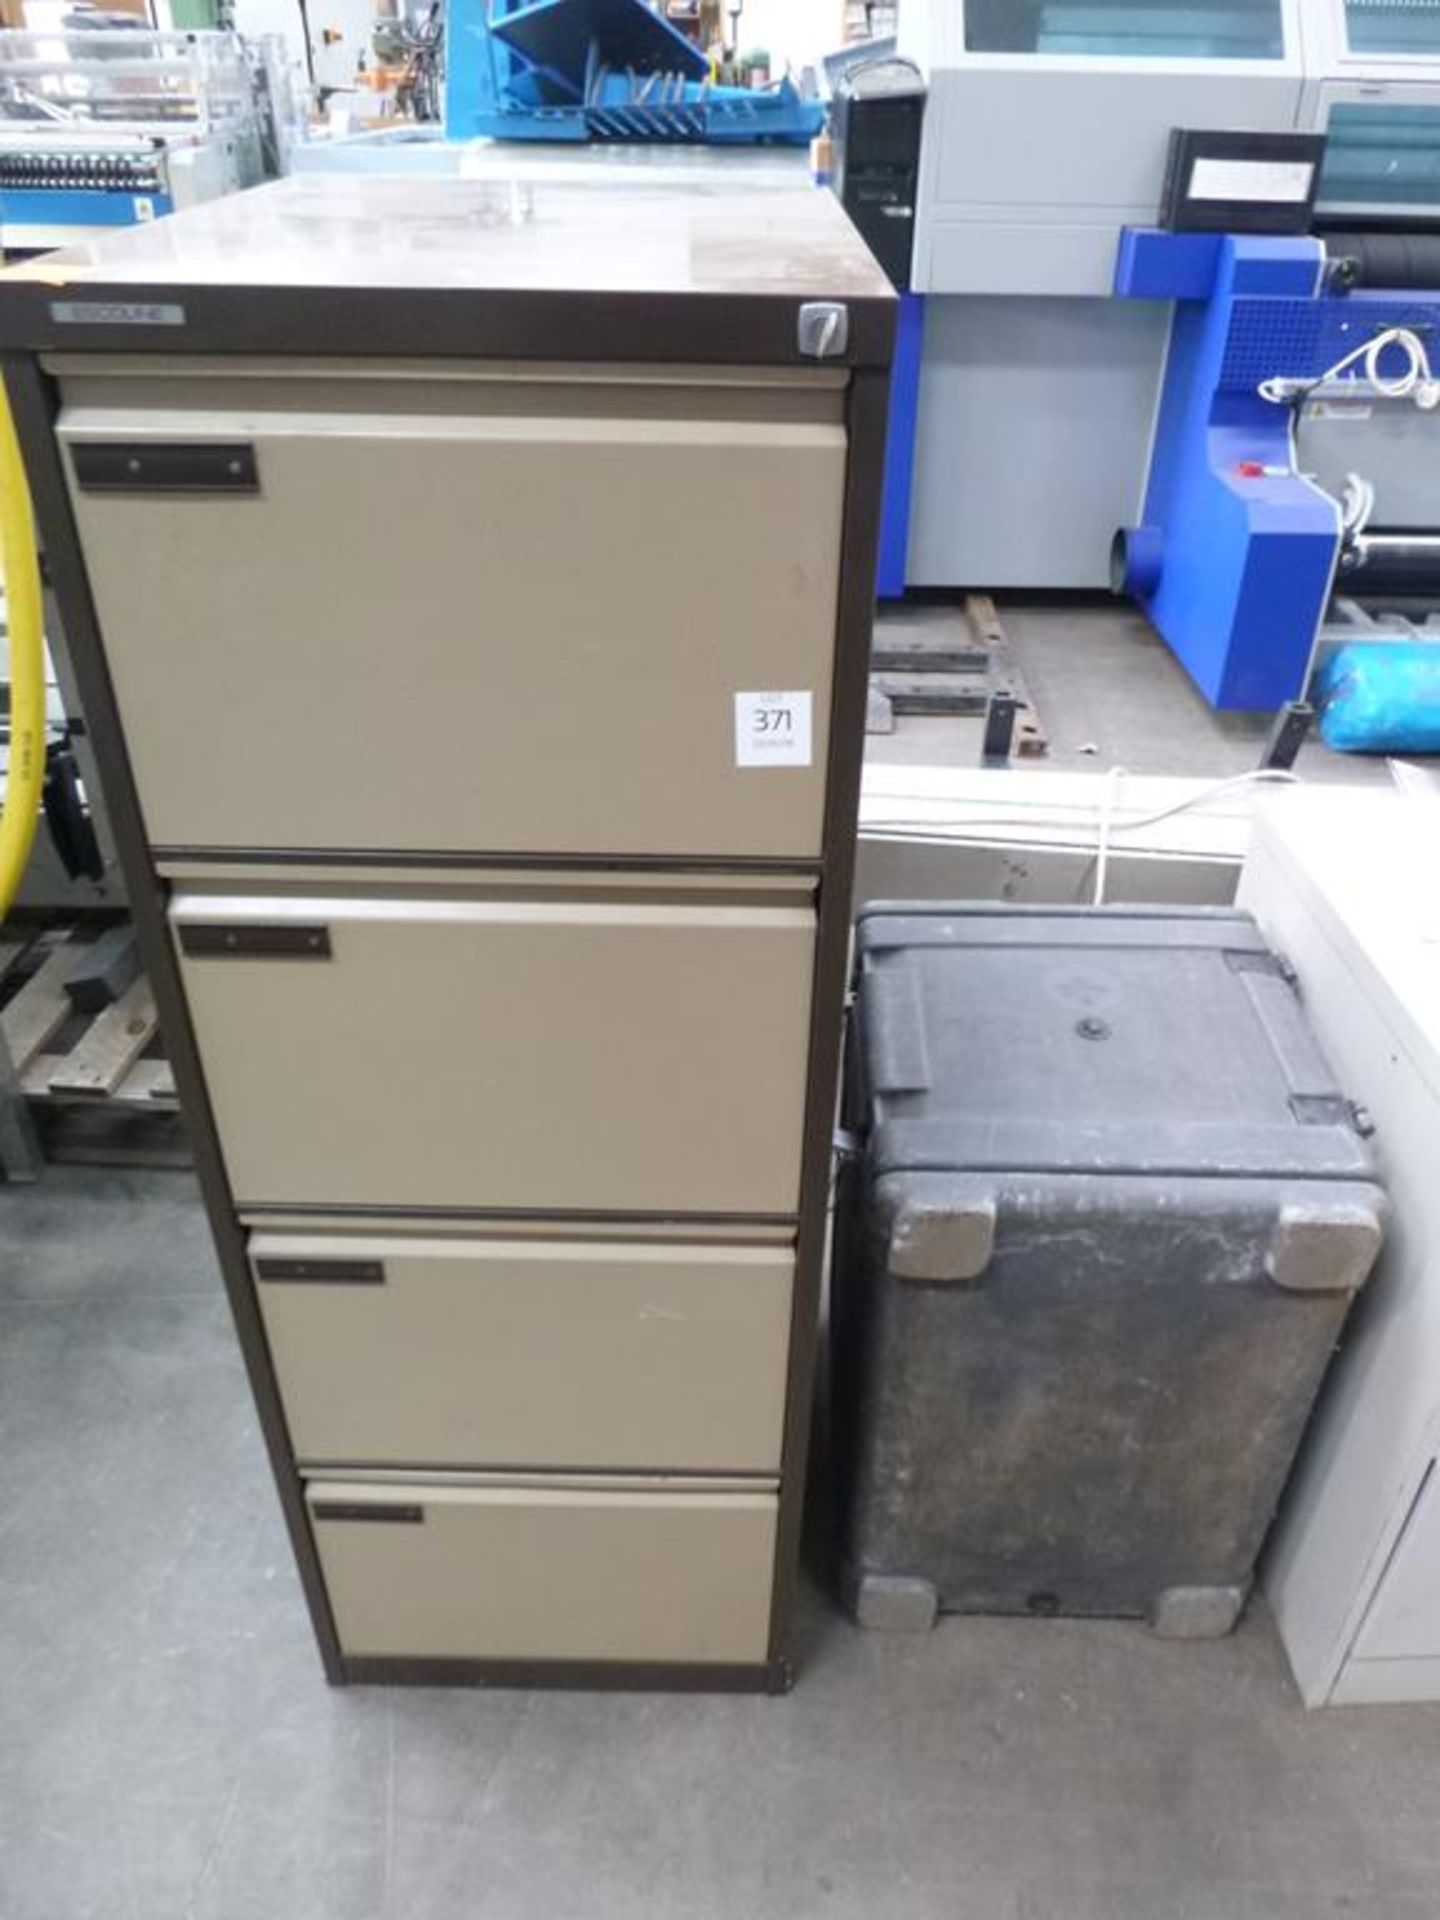 A 4 Drawer Metal Filing Cabinet and a Melform Plastic Flight Case